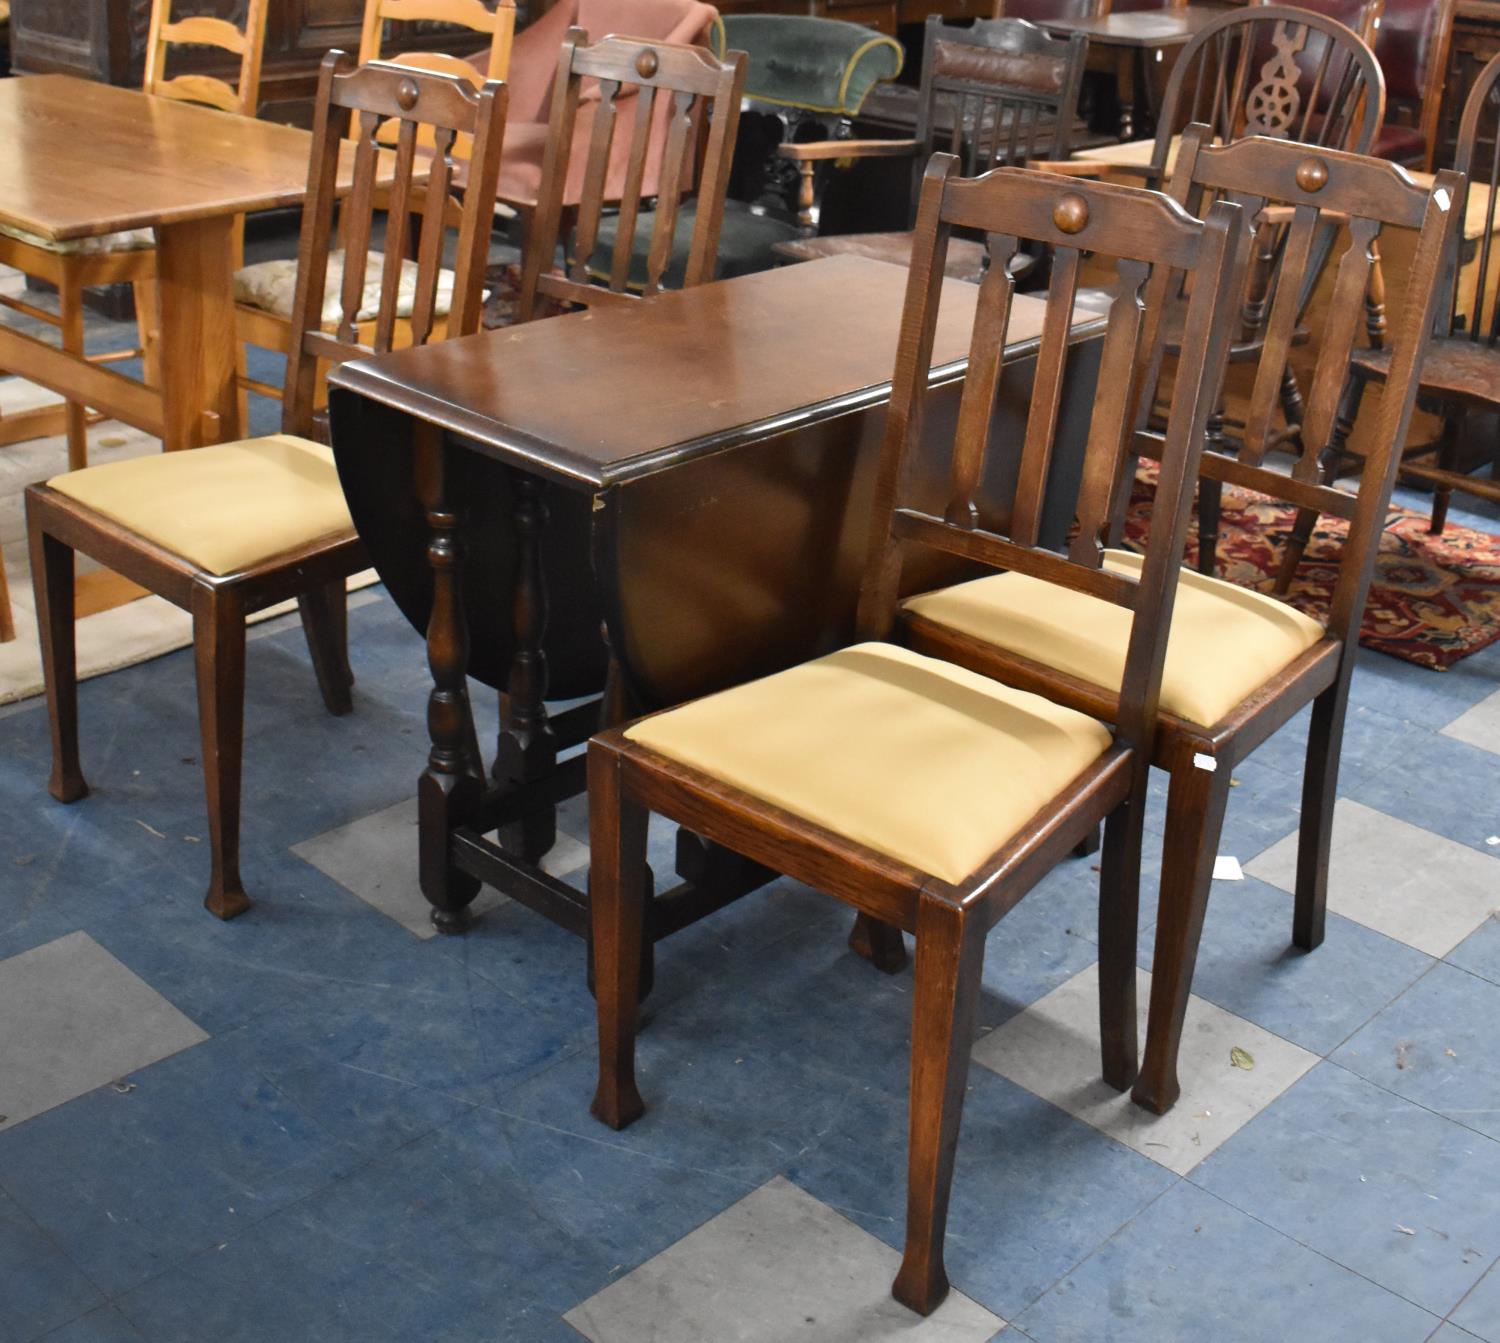 A Mid 20th Century Oak Drop Leaf Gate Legged Dining Table and Four Chairs